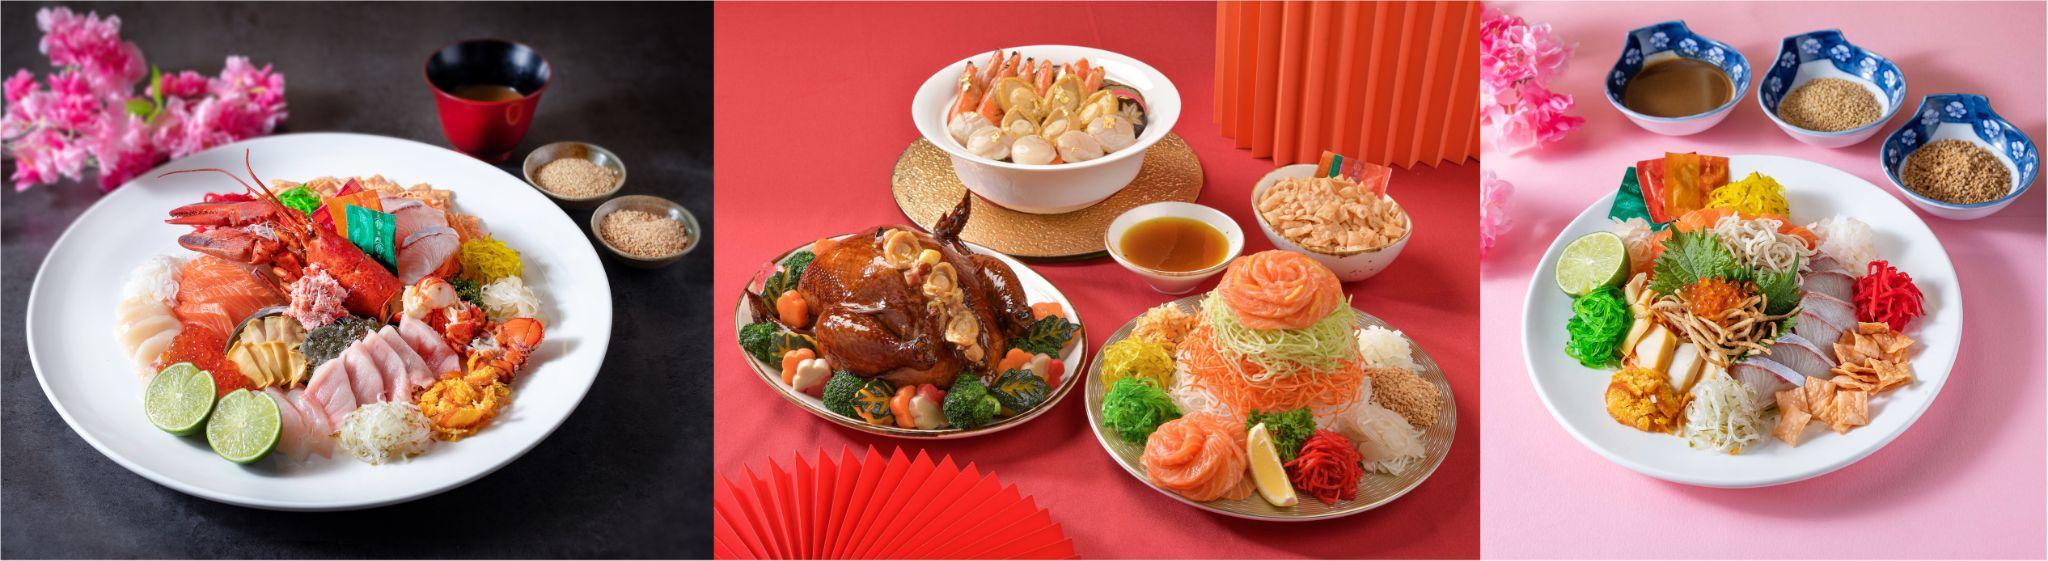 Lobang: MORE THAN 50 CNY 2023 F&B Deals - Your one stop guide to Yusheng, Pen Cai, Set Menus and more this Lunar New Year! - 29